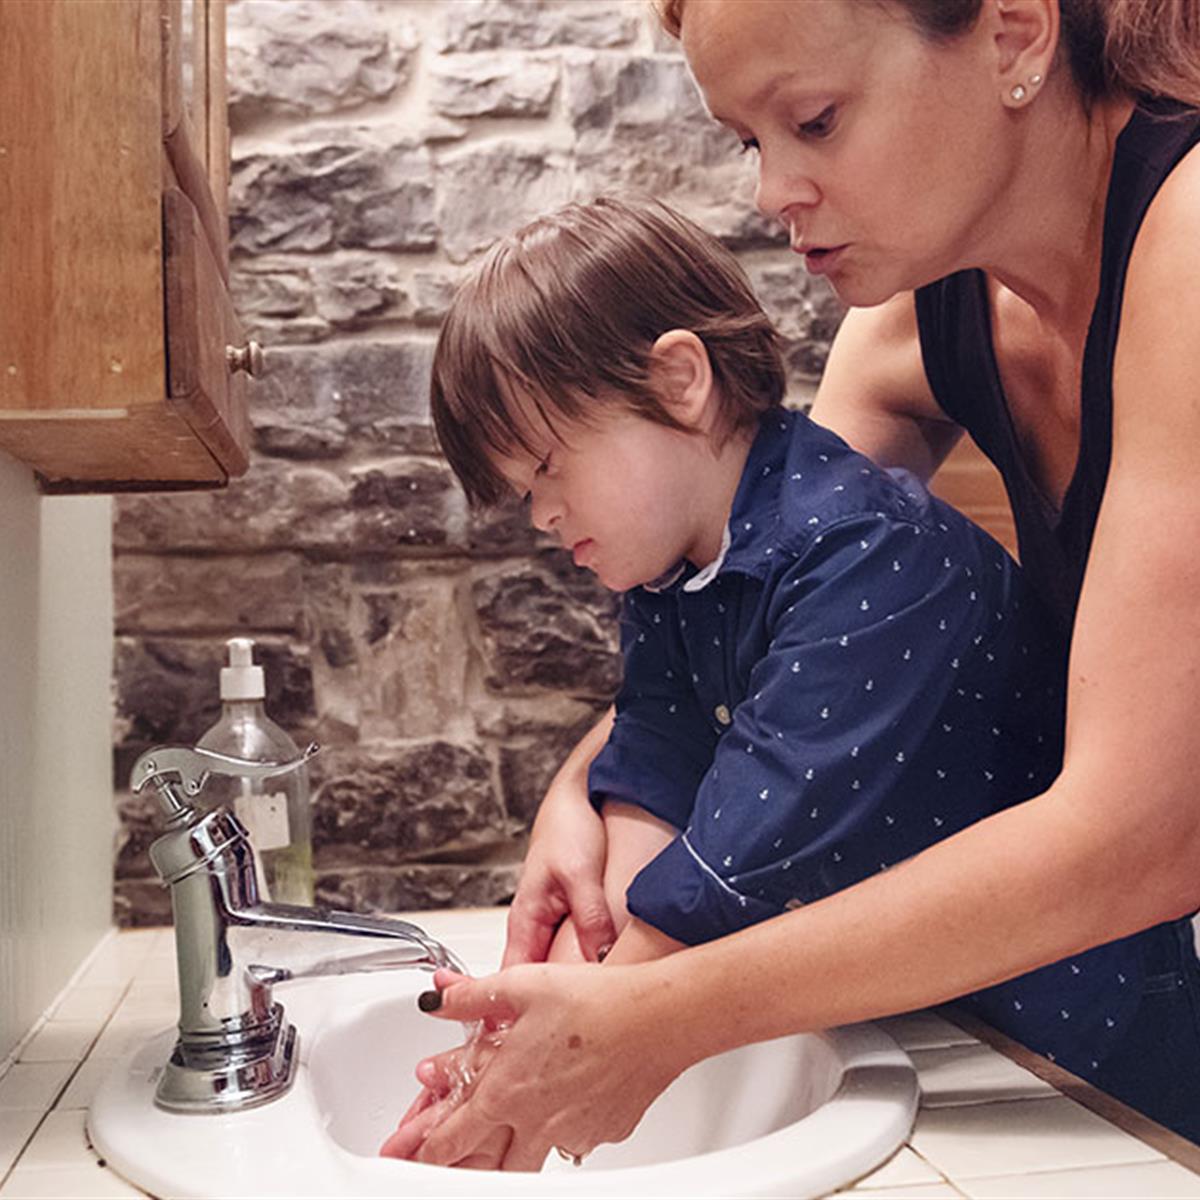 Potty Training Problems: When Accidents Happen and Tips to Solve Them